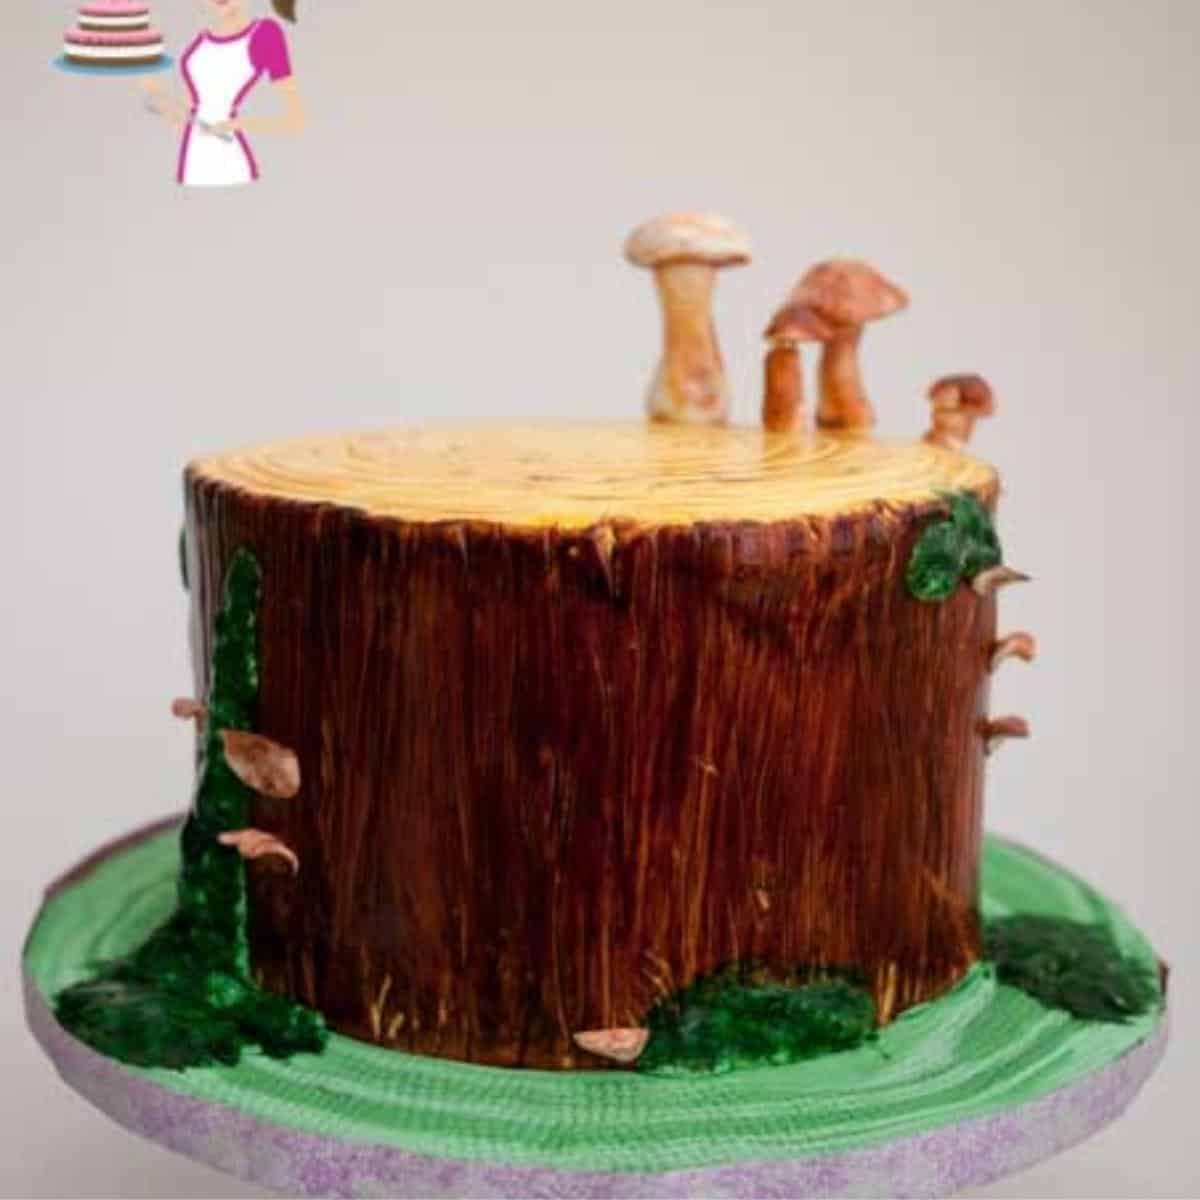 a decorated cake looking like tree